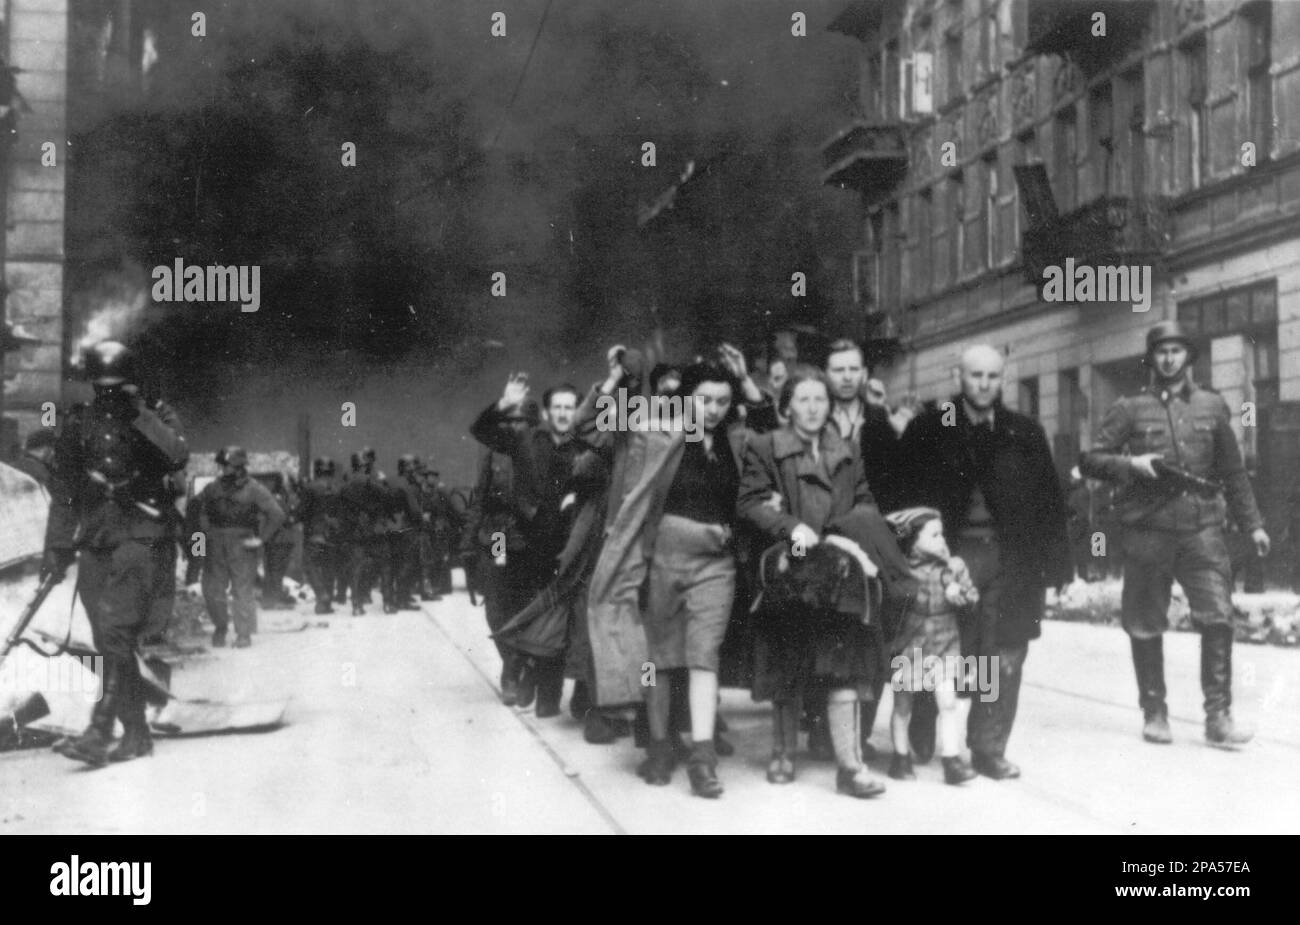 FILE ** In this 1943 file photo, a group of Polish Jews are led away for  deportation by German SS soldiers, in April/May 1943, during the  destruction of the Warsaw Ghetto